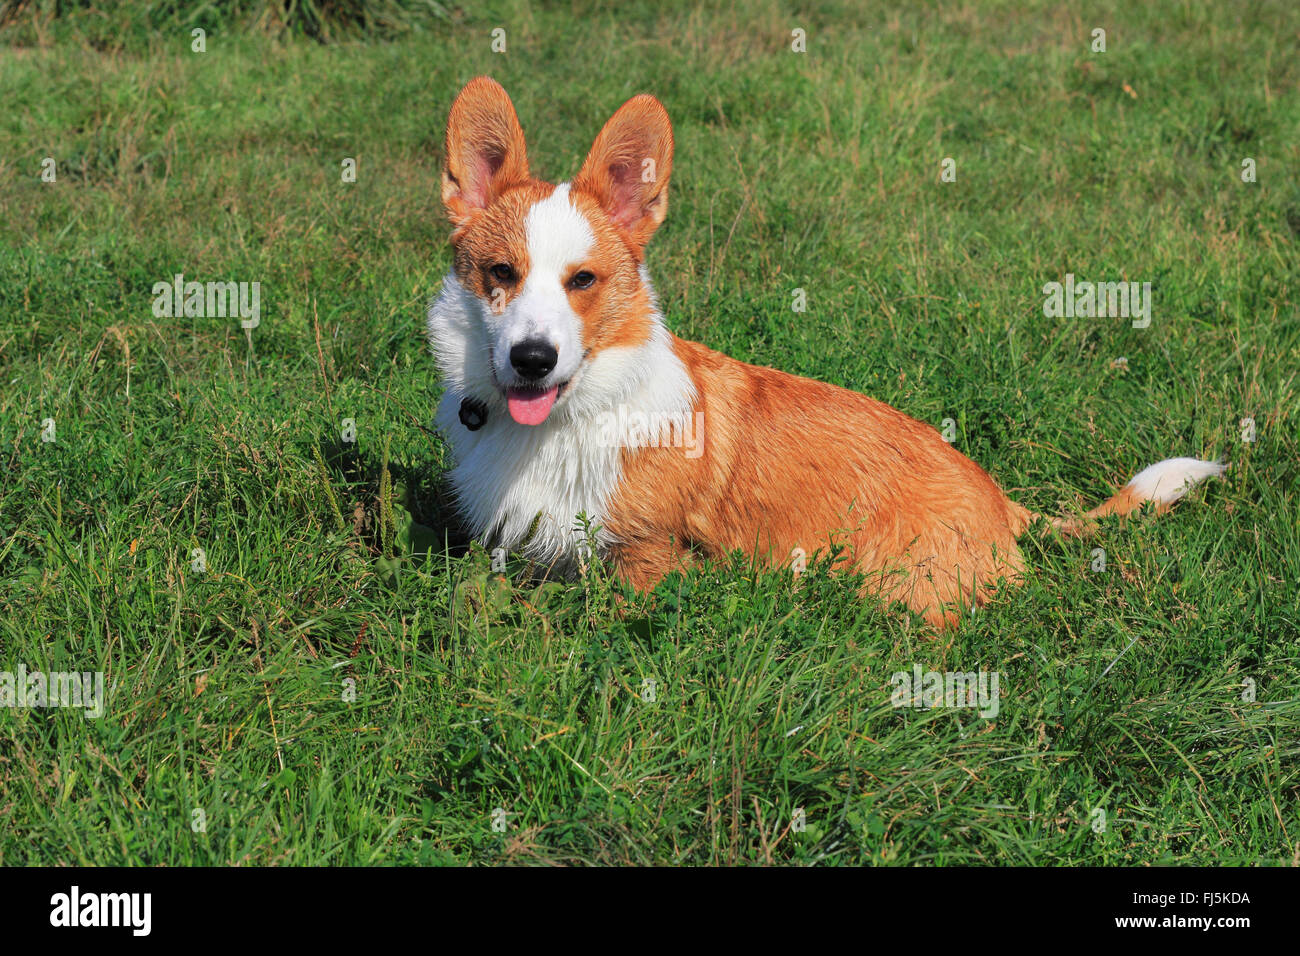 Welsh Corgi Cardigan (Canis lupus f. familiaris), six months old male dog sitting in a meadow, Germany Stock Photo